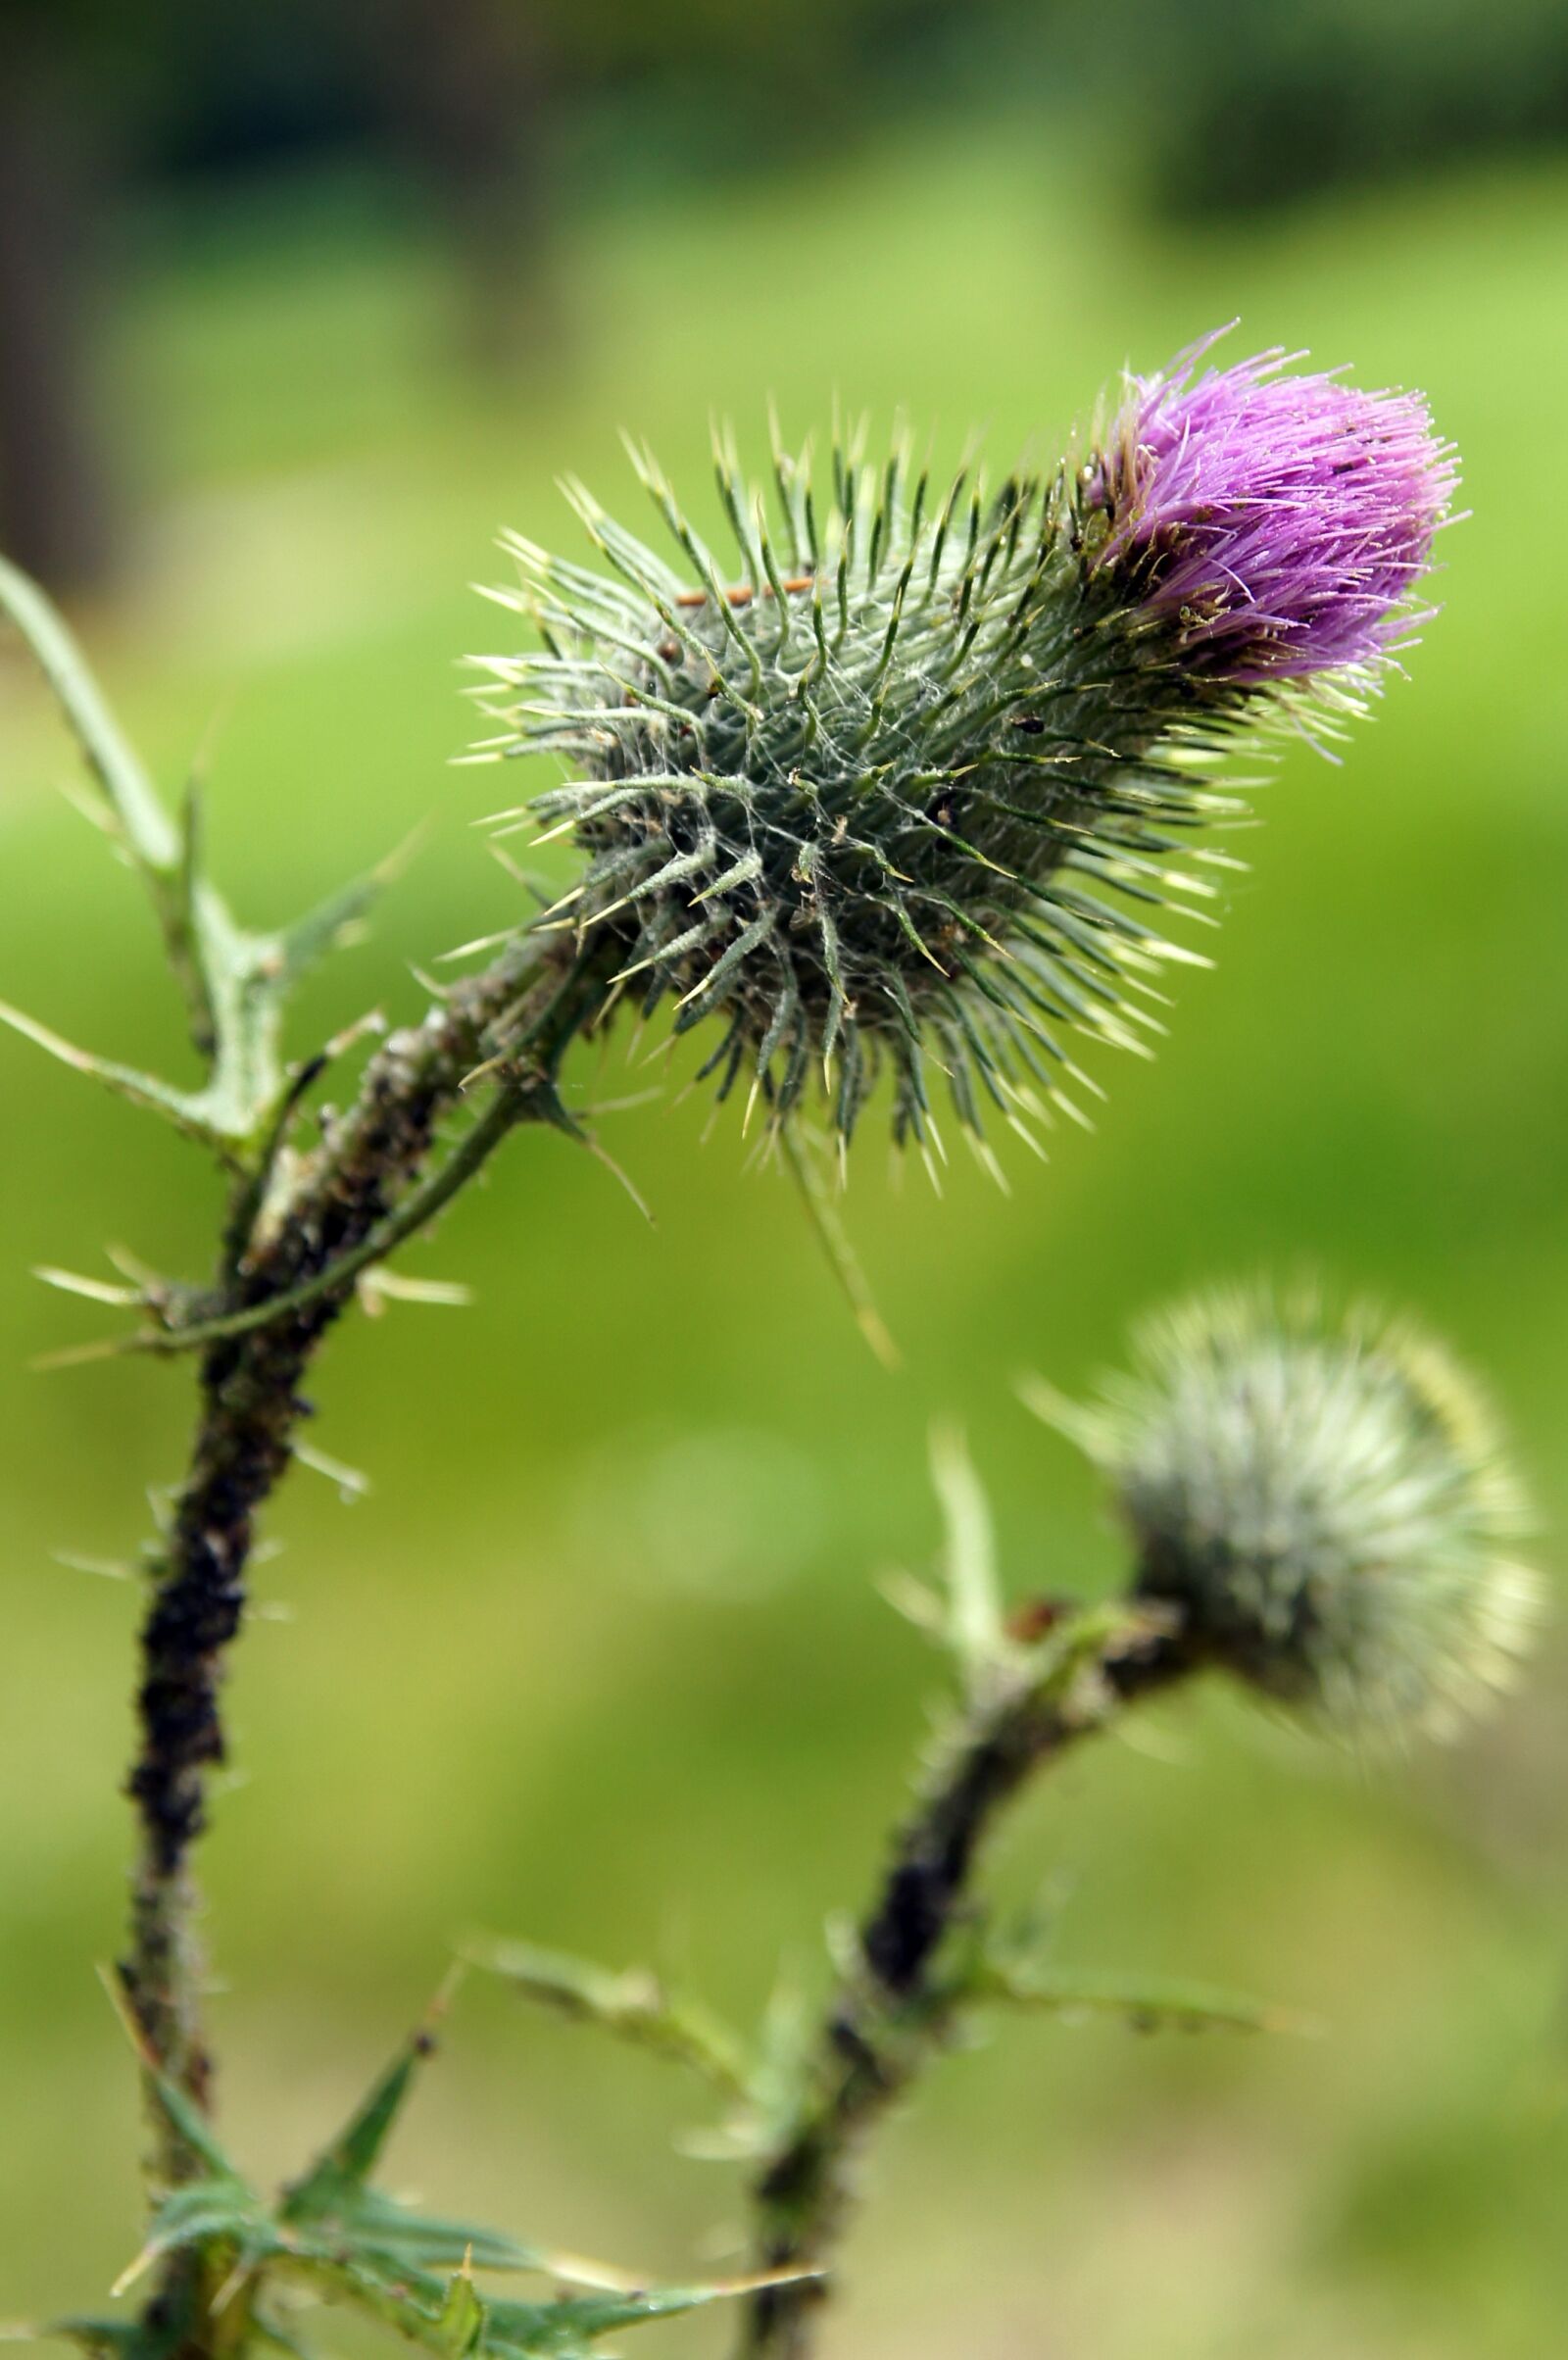 17-50mm F2.8 sample photo. Thistle, flower, nature photography